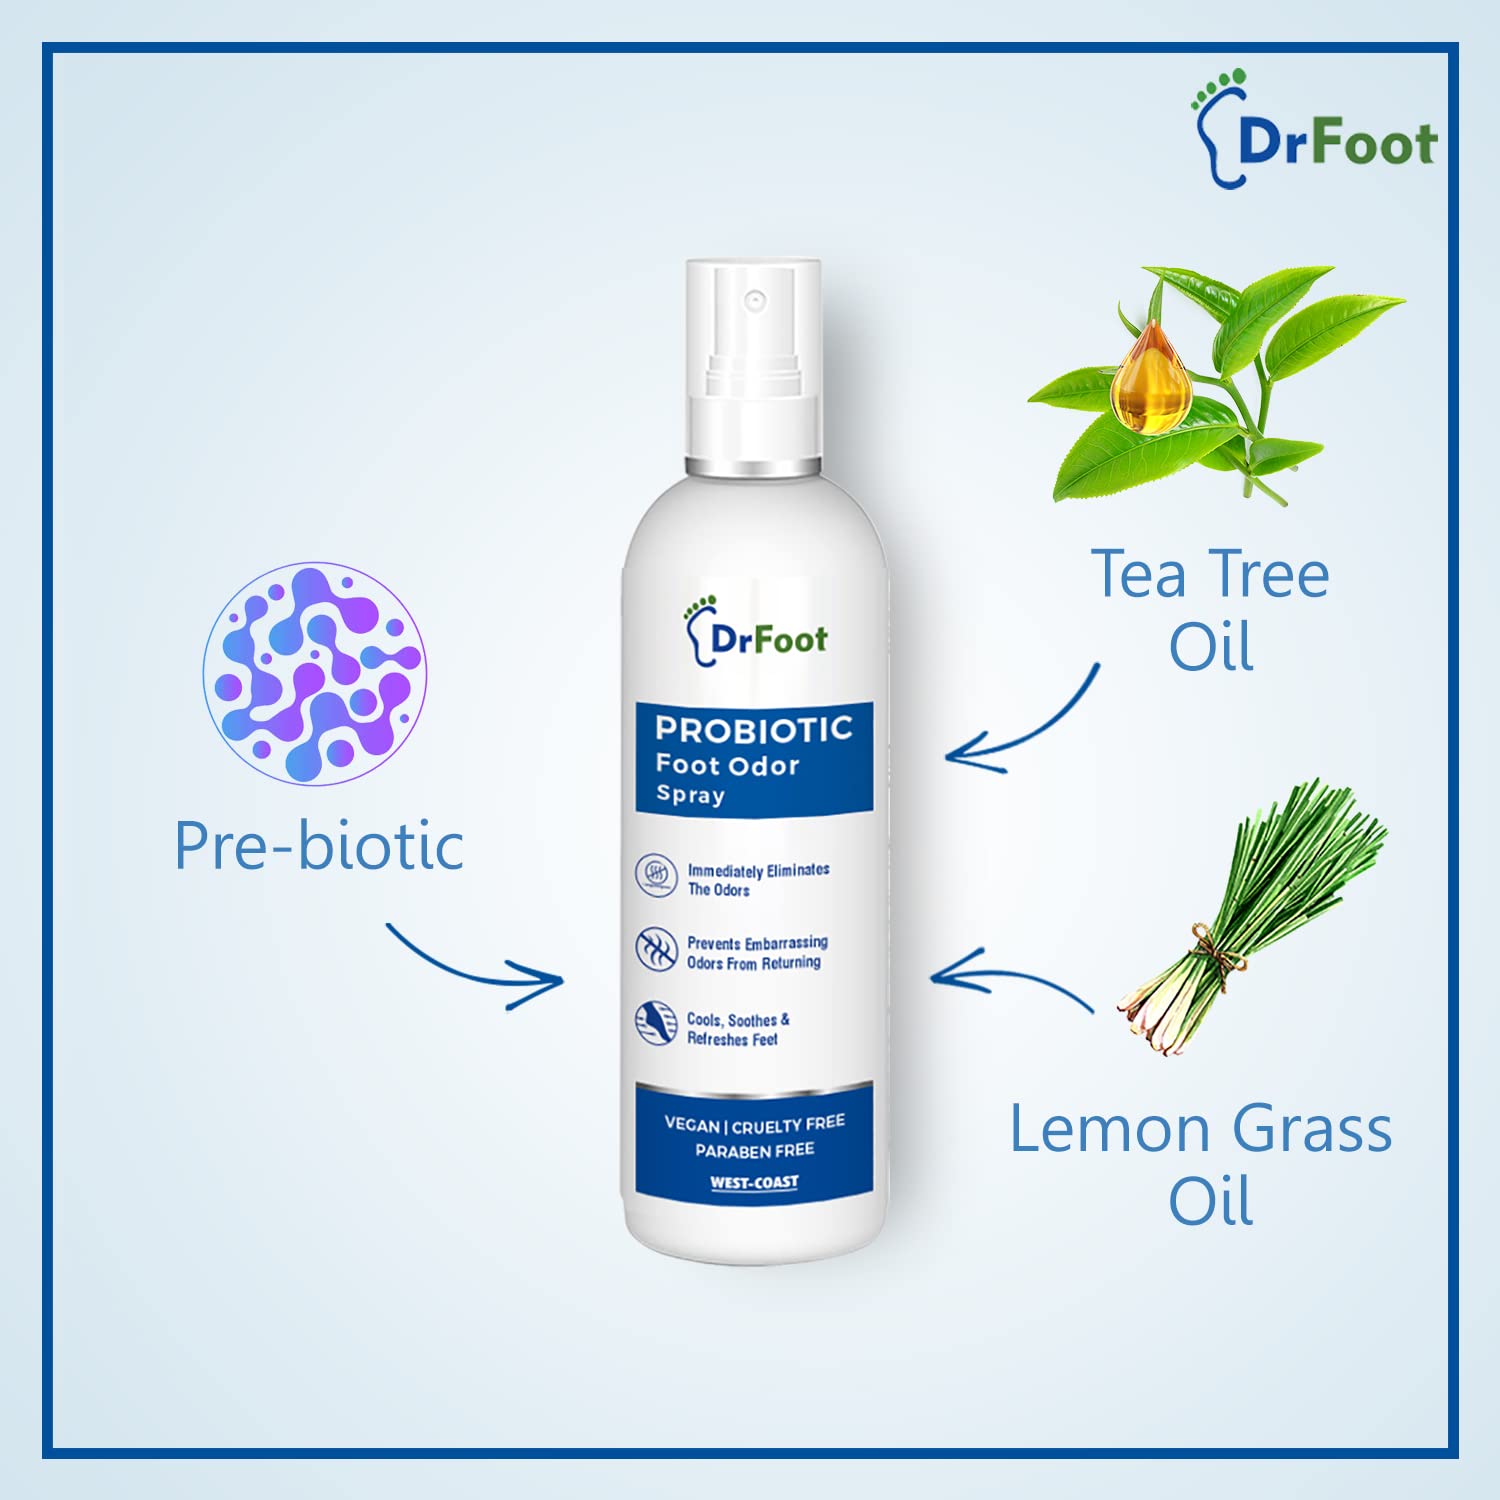 Dr Foot Probiotic Foot Odor Spray Helps to remove Feet & Shoes Worst Odors, Cools, Soothes & Refreshes Feet with the goodness of Lemon Grass Oil, Tea Tree Oil - 100ml